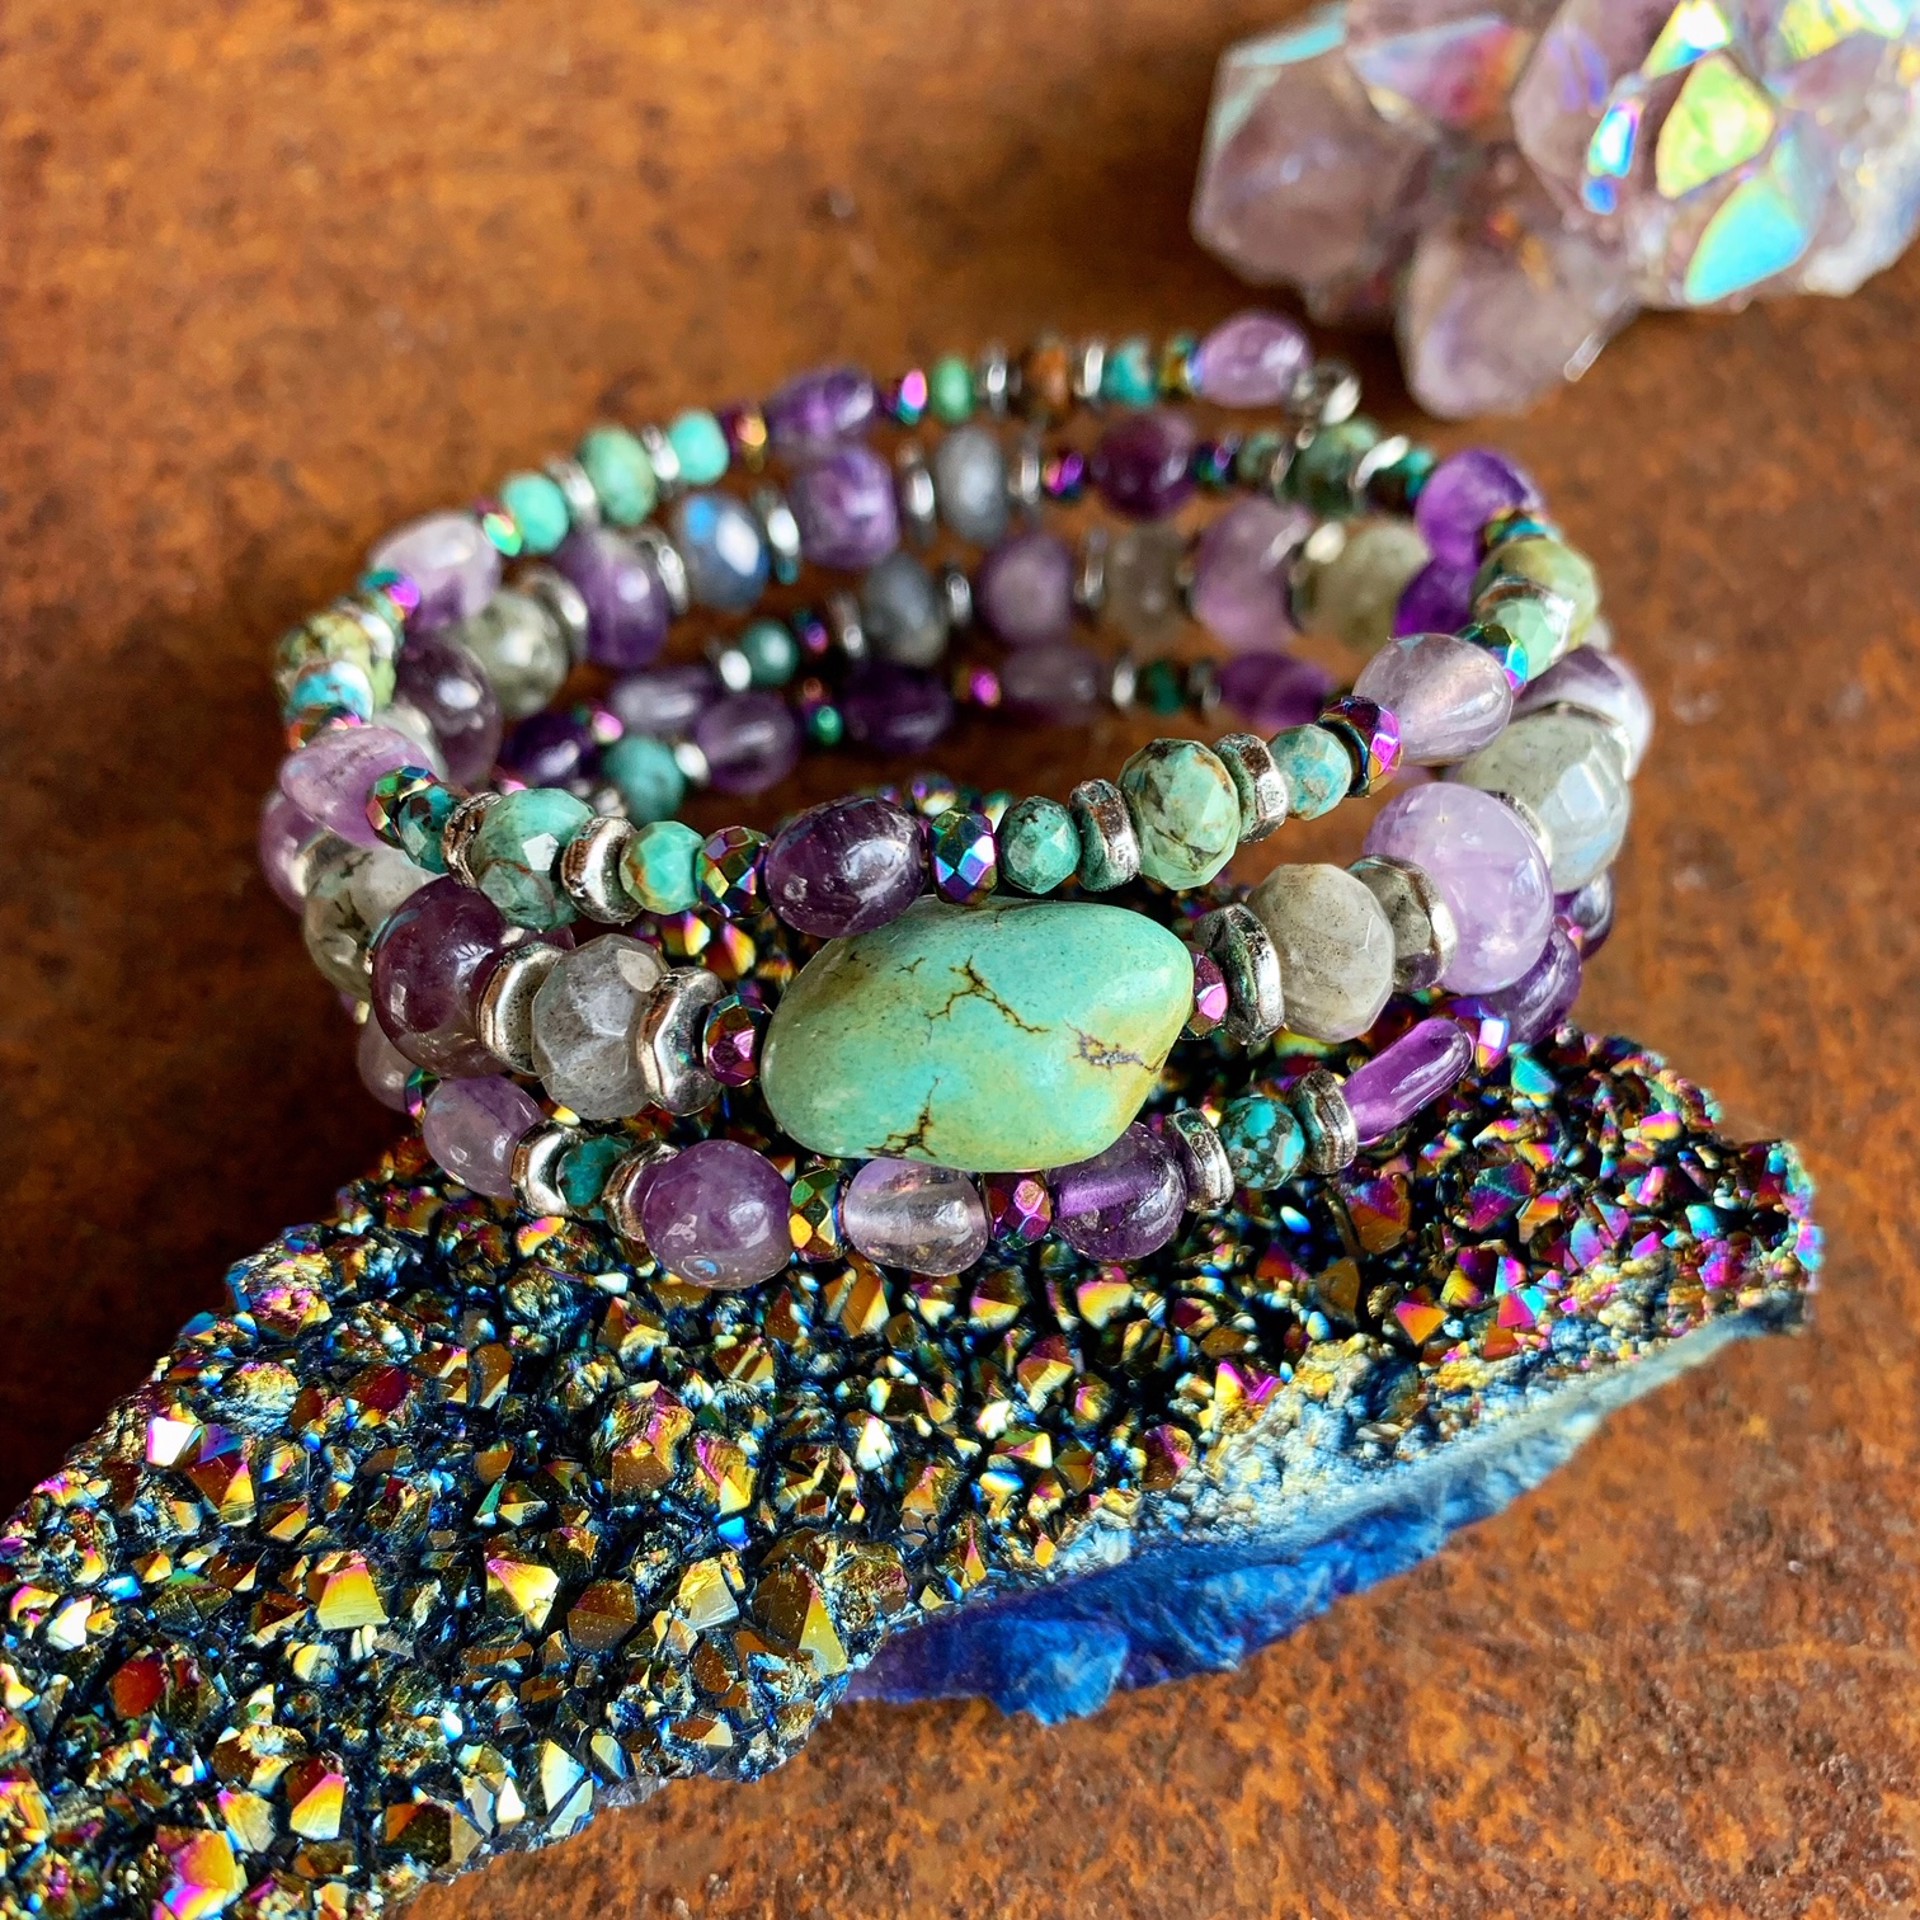 K765 Triple Wrap Turquoise and Amethyst Bracelet by Kelly Ormsby